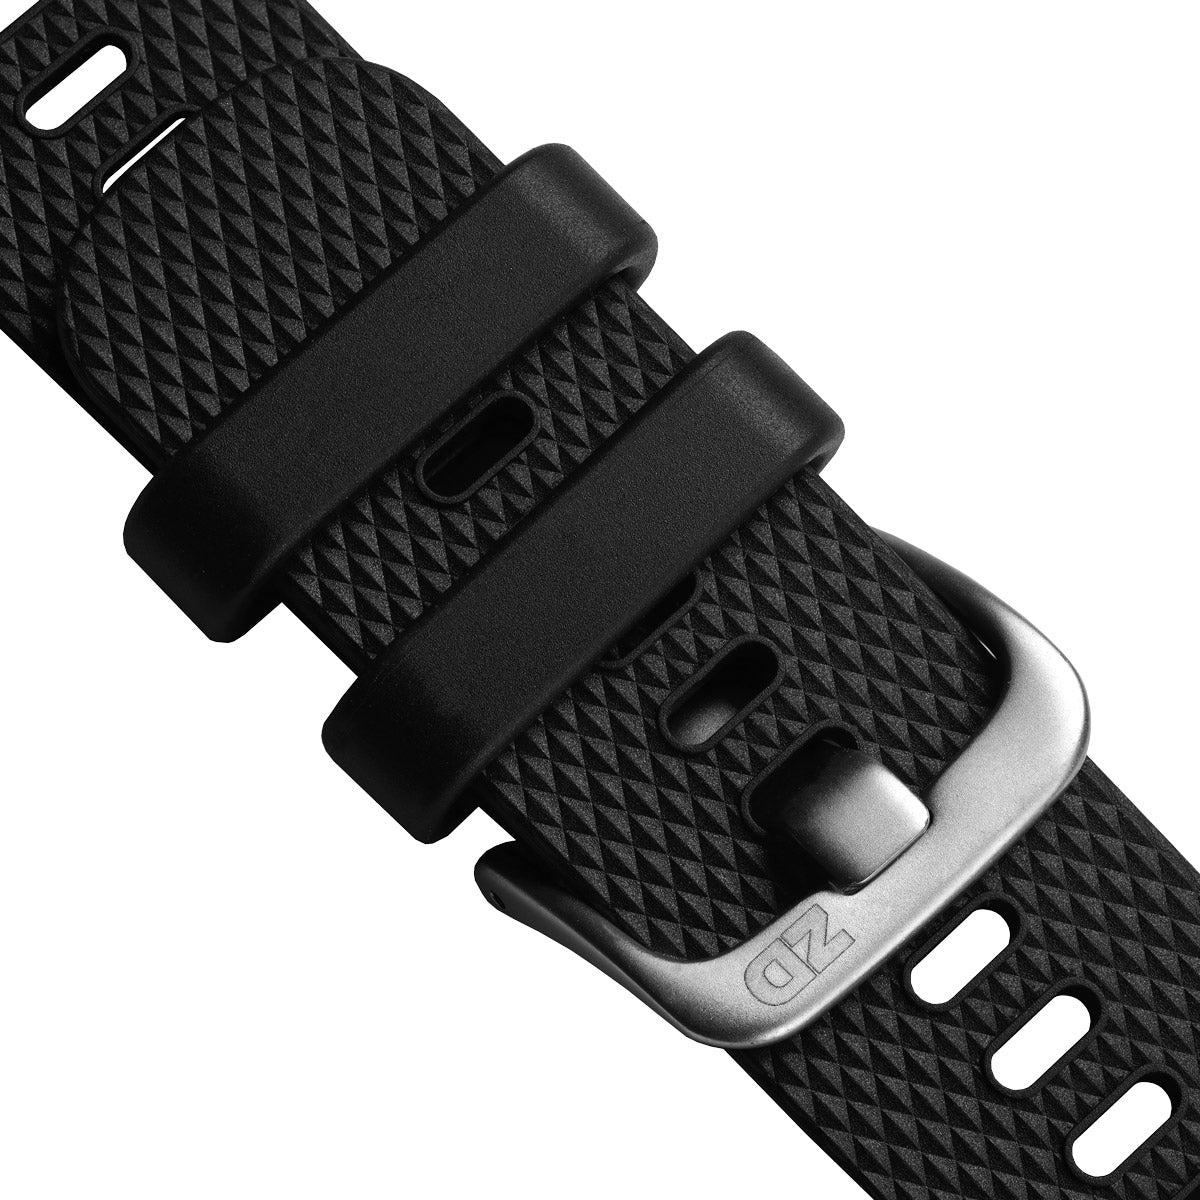 ZULUDIVER 330 Ladder Italian Rubber Dive Watch Strap - additional image 4